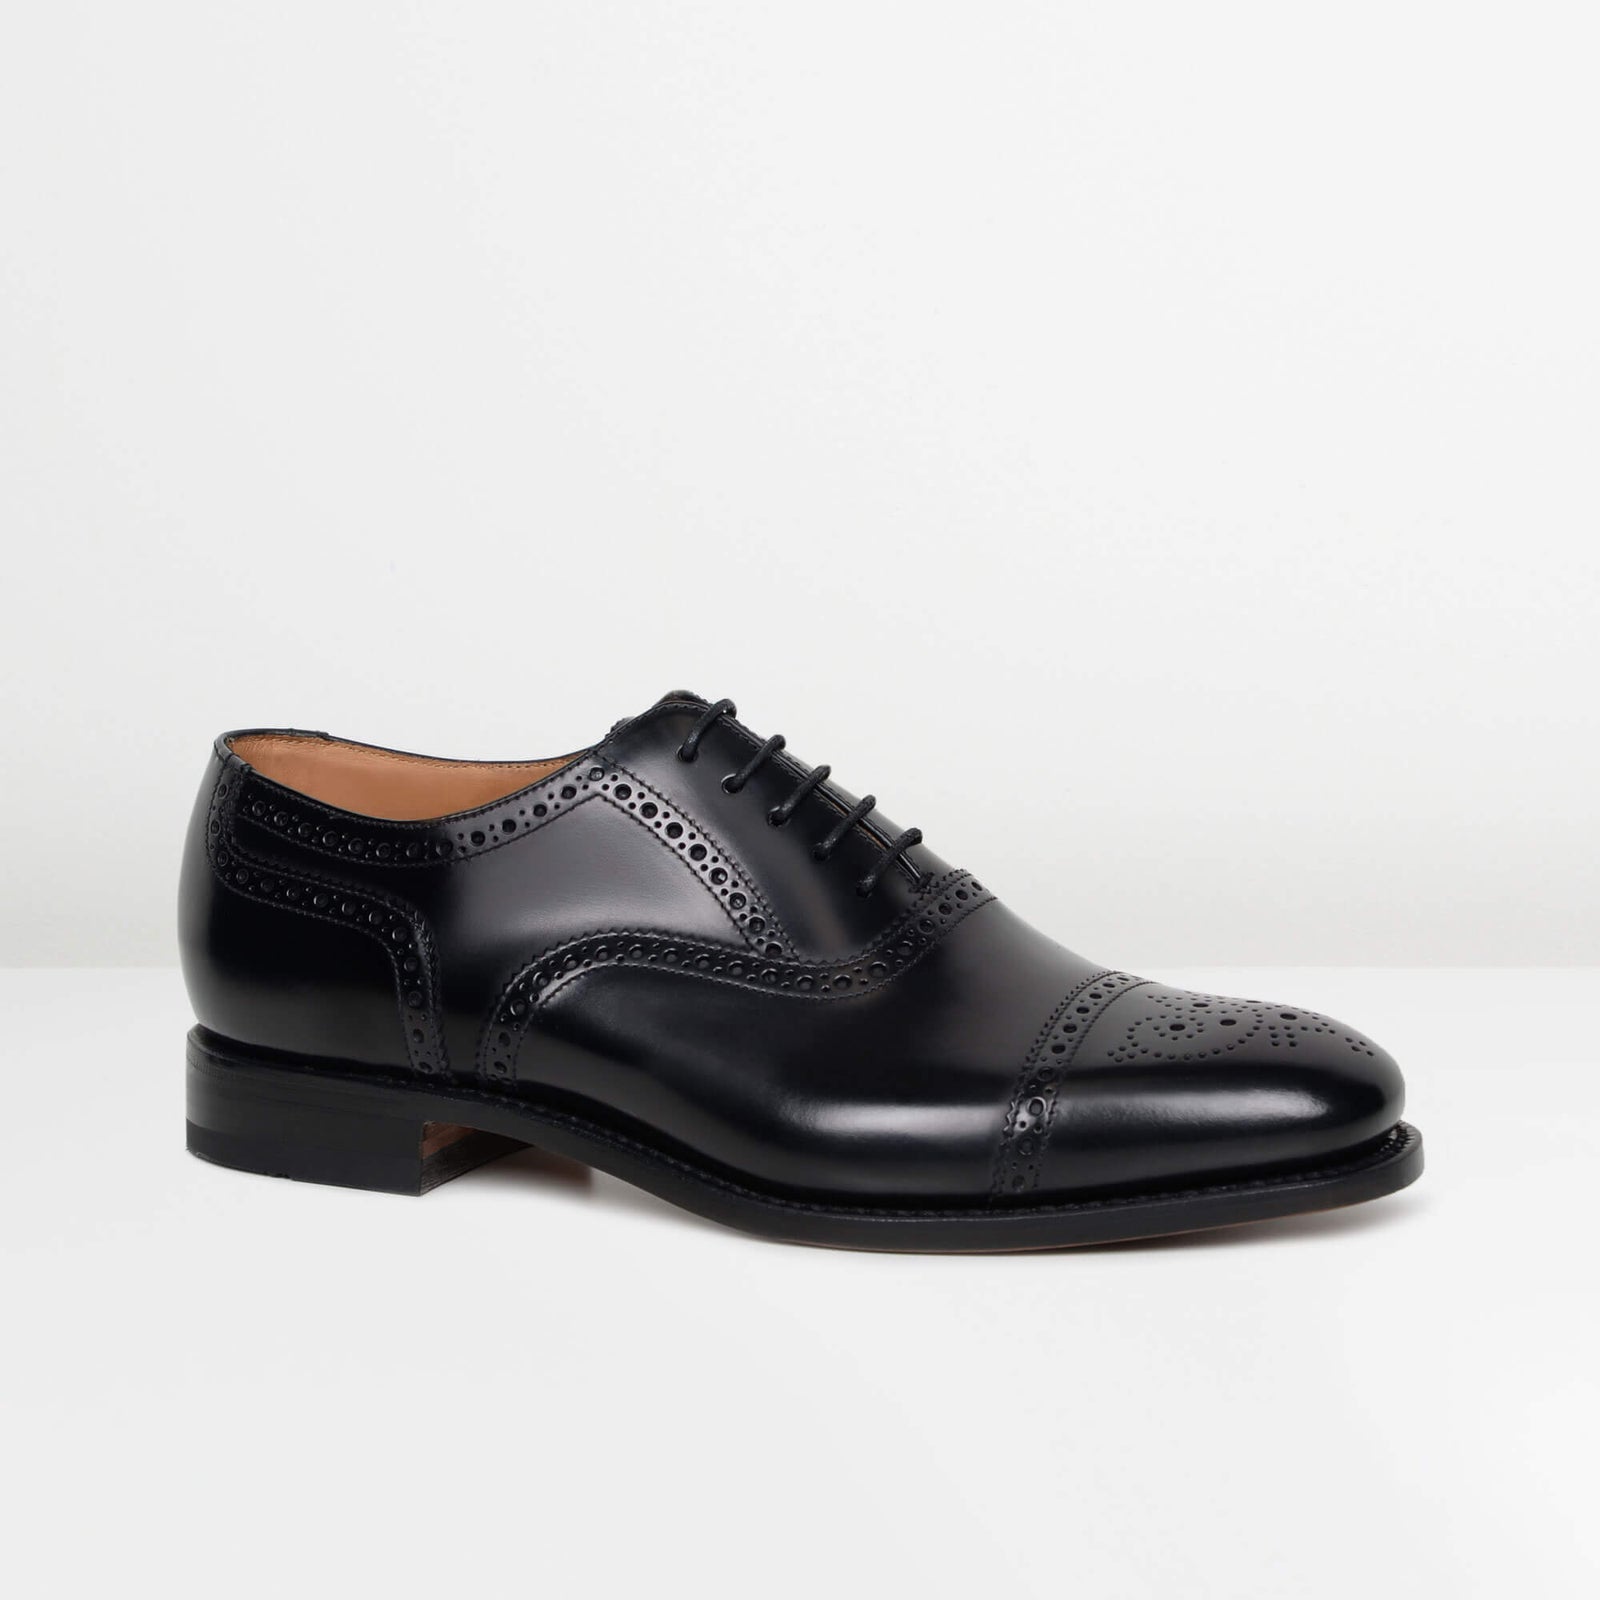 Black 201B Loake Oxford Brogues from 